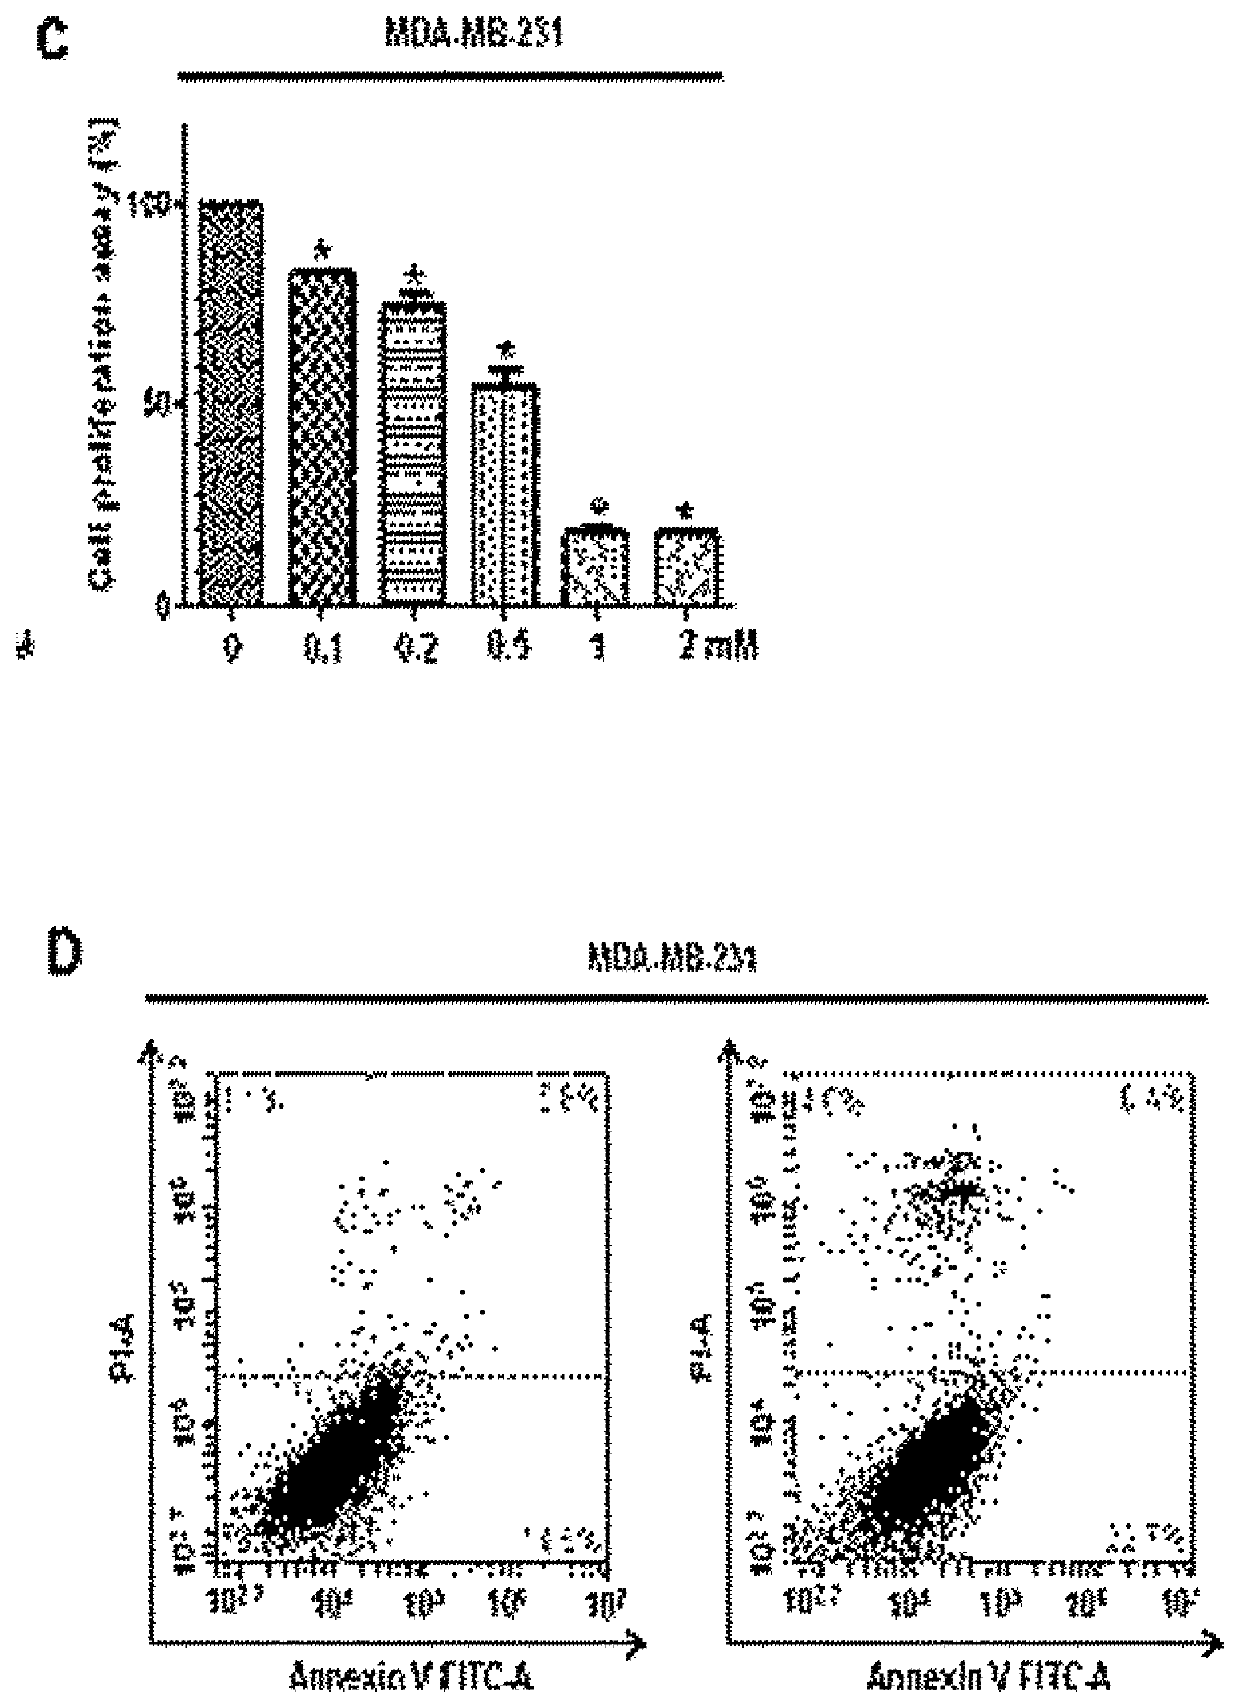 Composition for inhibiting growth of breast cancer stem cells containing phenylacetaldehyde